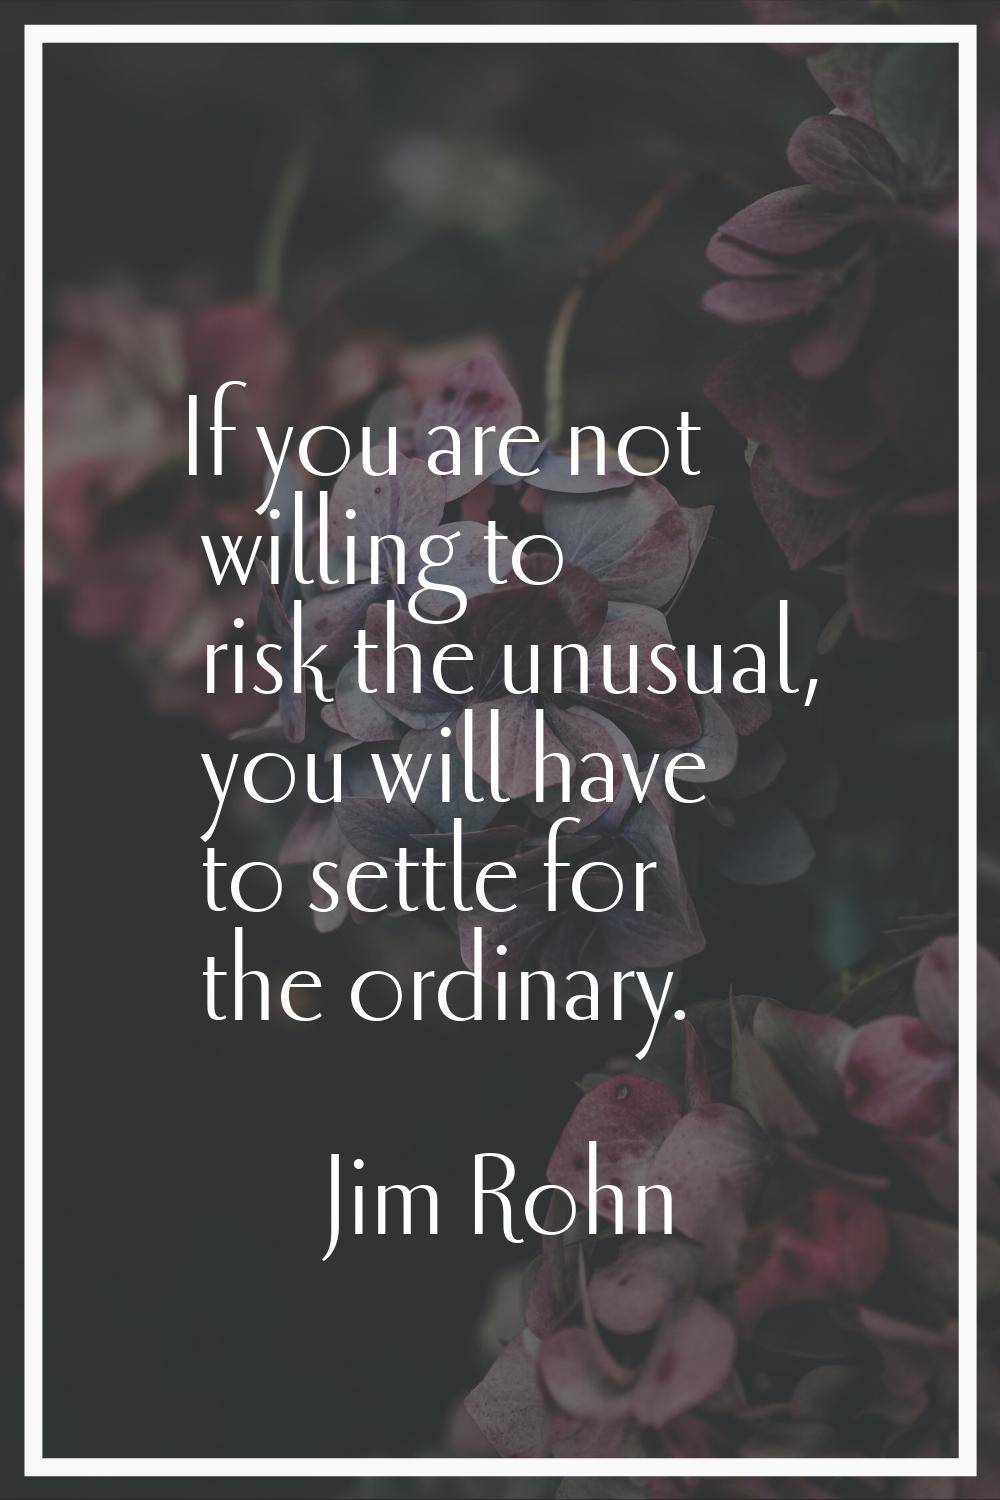 If you are not willing to risk the unusual, you will have to settle for the ordinary.